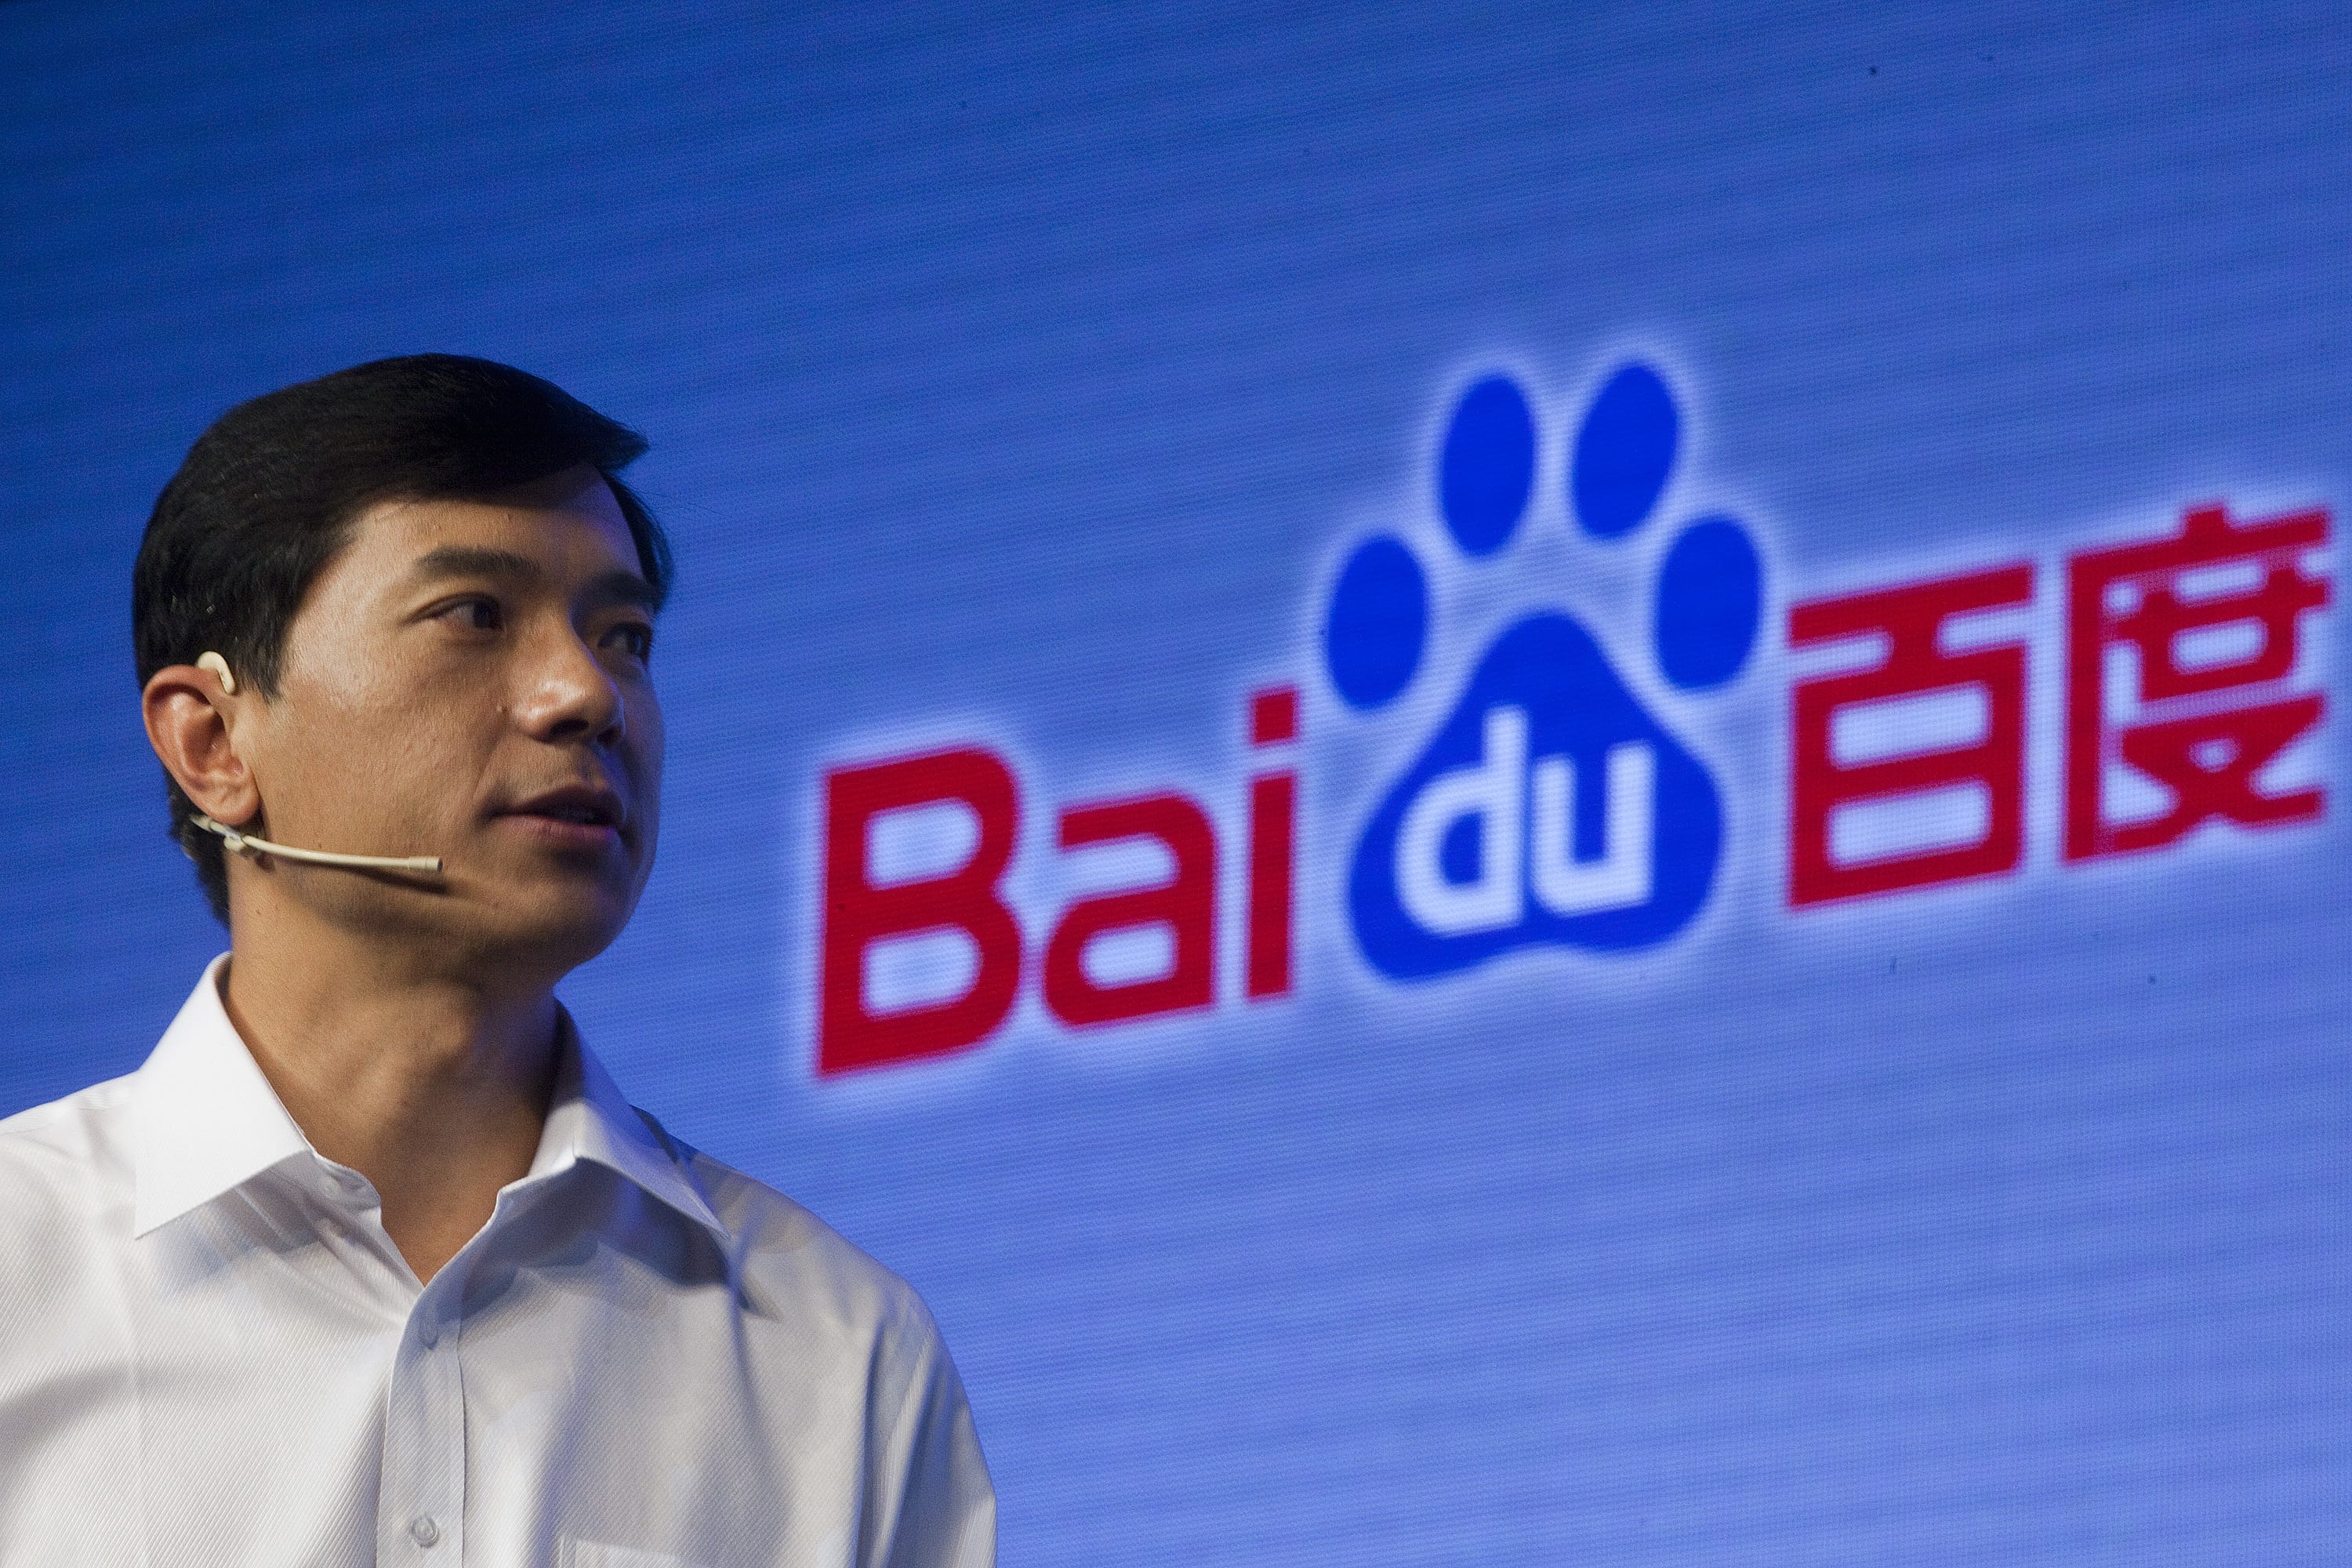 Chinese tech giant Baidu to raise at least $3 billion in Hong Kong listing this month